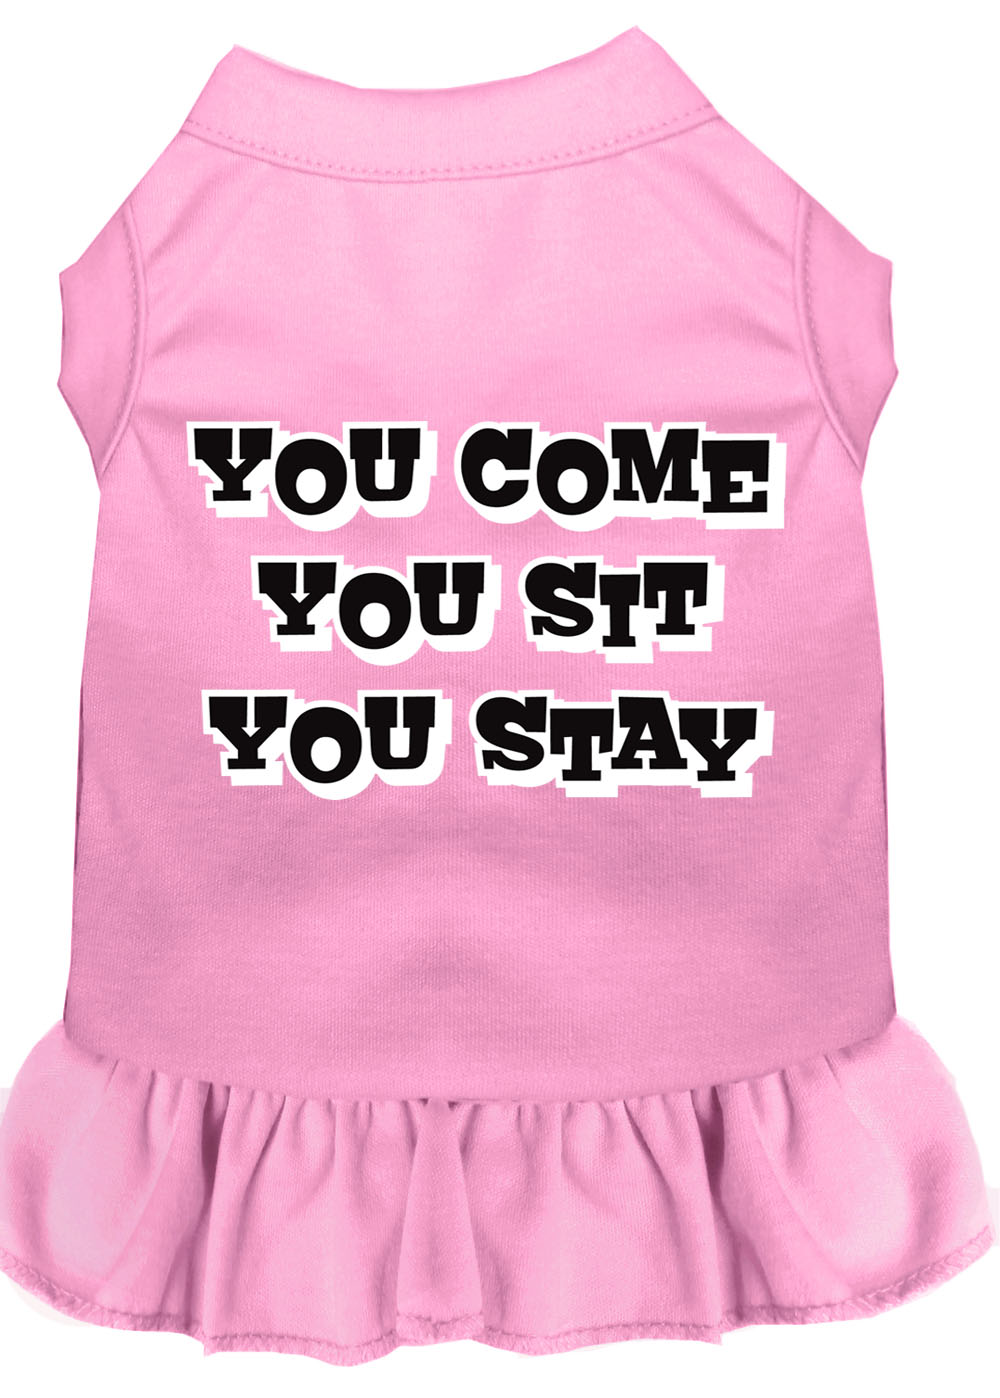 You Come, You Sit, You Stay Screen Print Dress Light Pink Xs GreatEagleInc